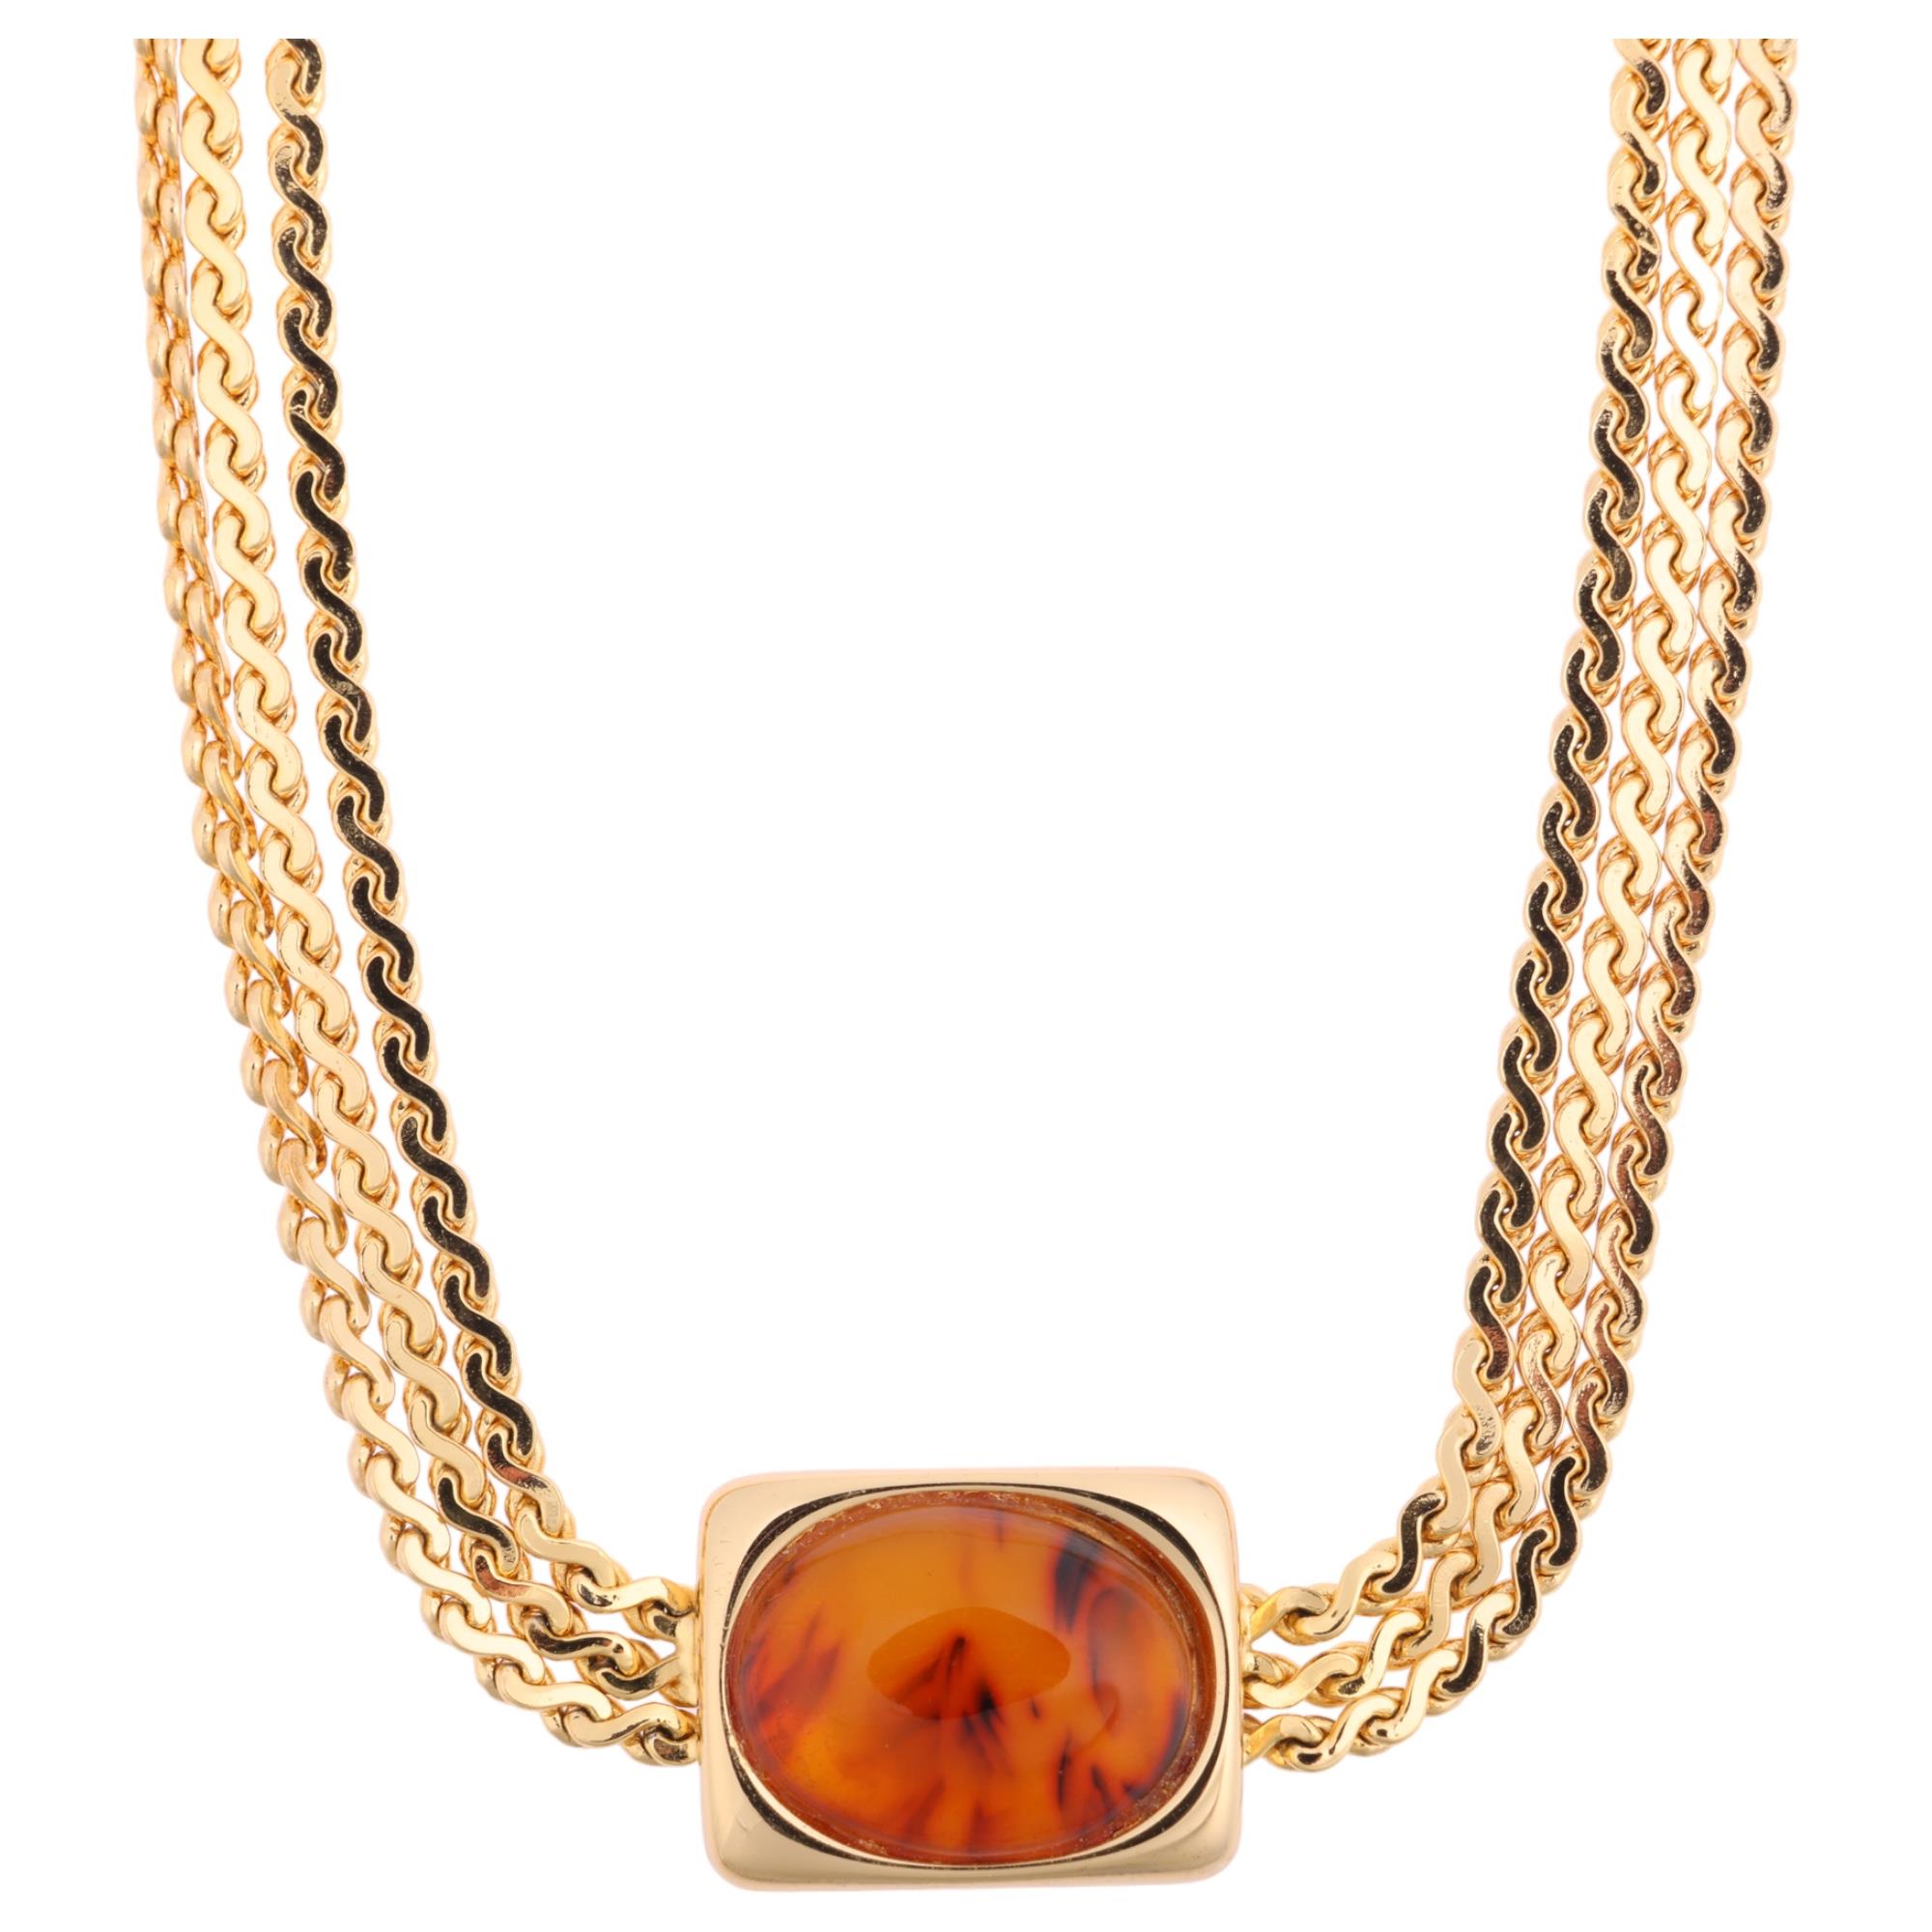 CHRISTIAN DIOR - a Vintage gold plated Bakelite necklace, on multi-strand serpentine link chain,